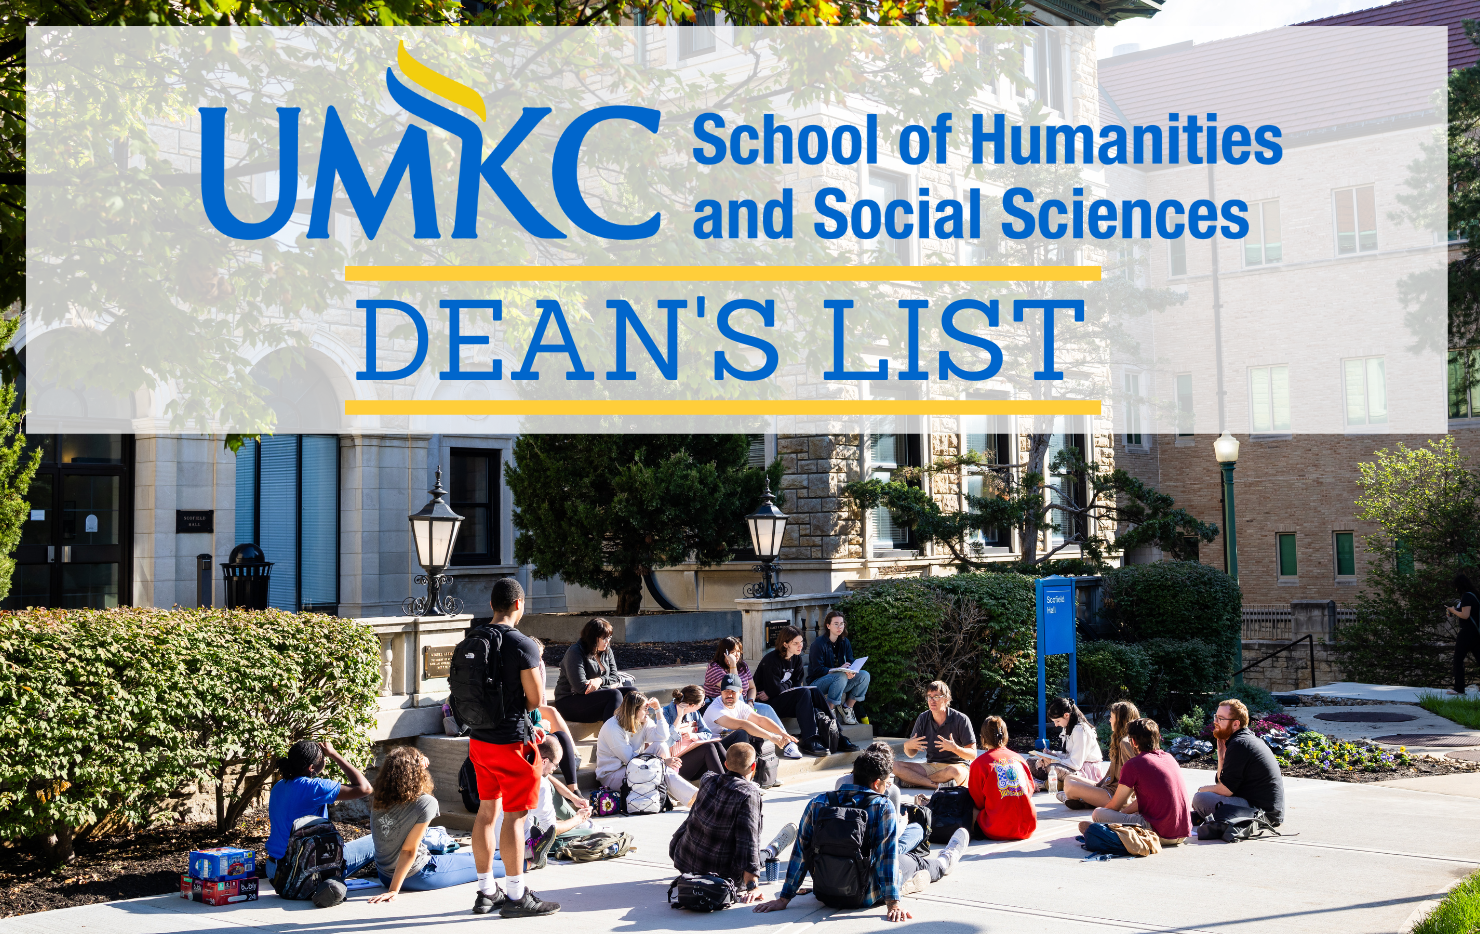 UMKC School of Humanities and Social Sciences logo with text that says DEAN'S LIST over a photo of Scofield Hall, an old stone mansion surrounded by trees